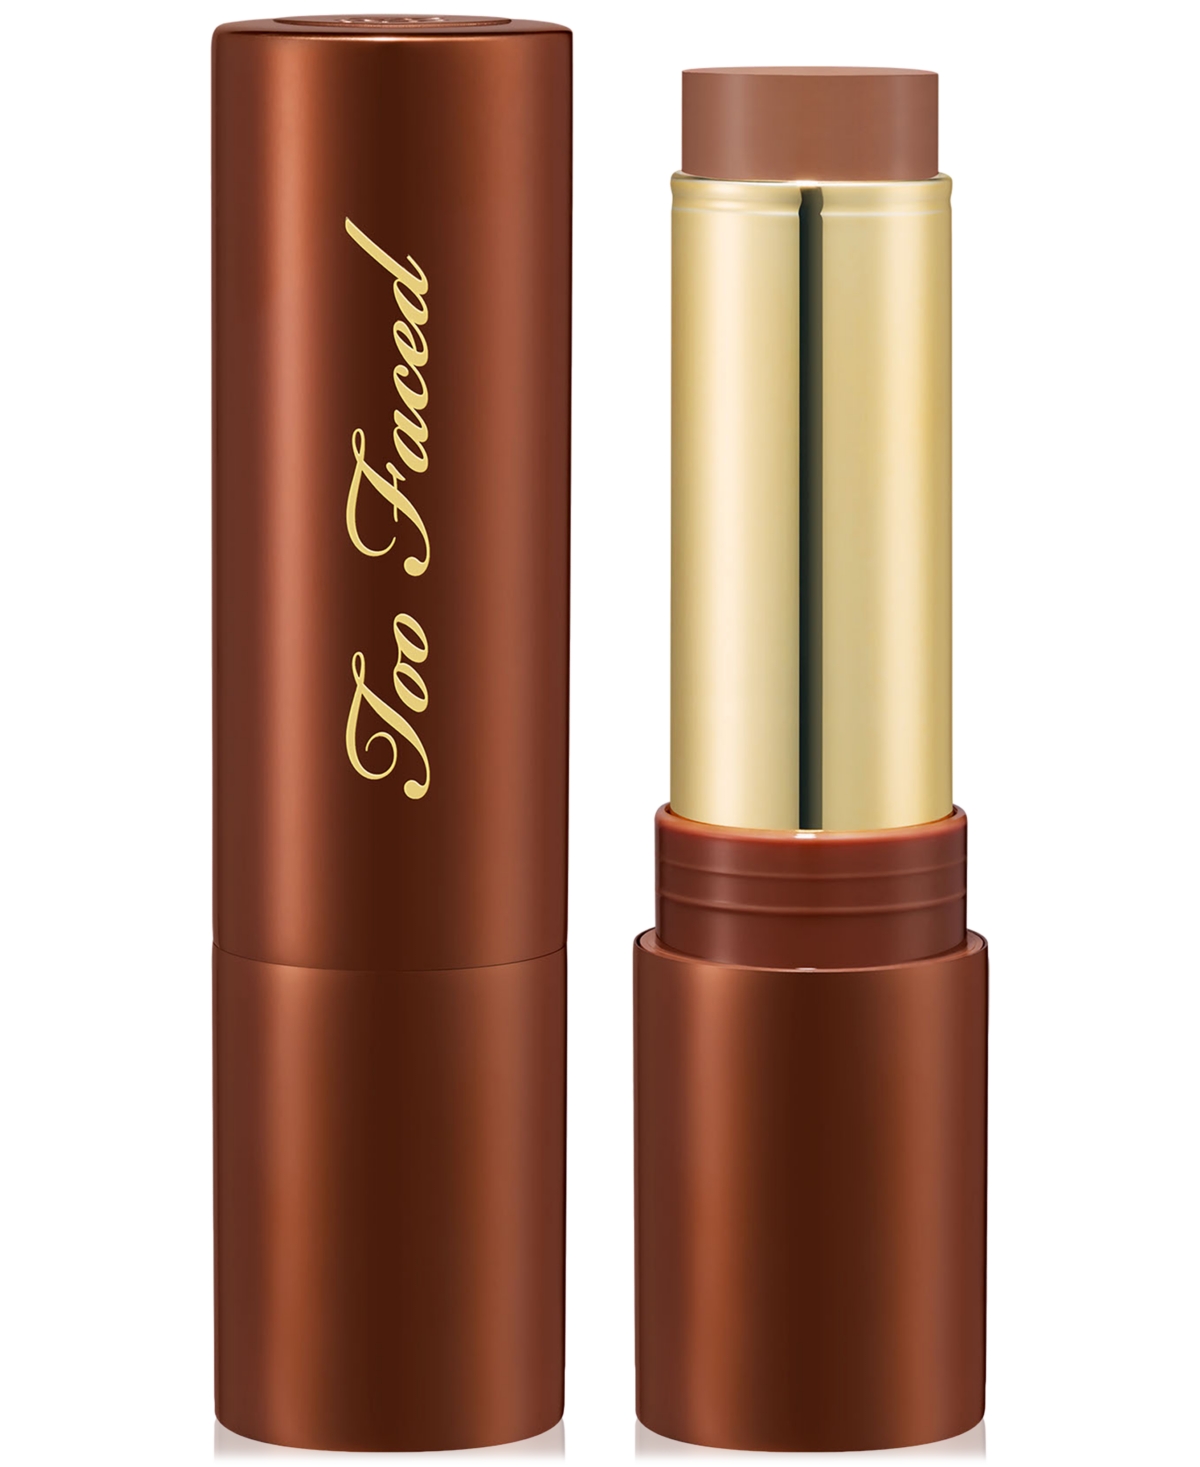 Too Faced Chocolate Soleil Melting Bronzing & Sculpting Stick In Chocolate Souffle